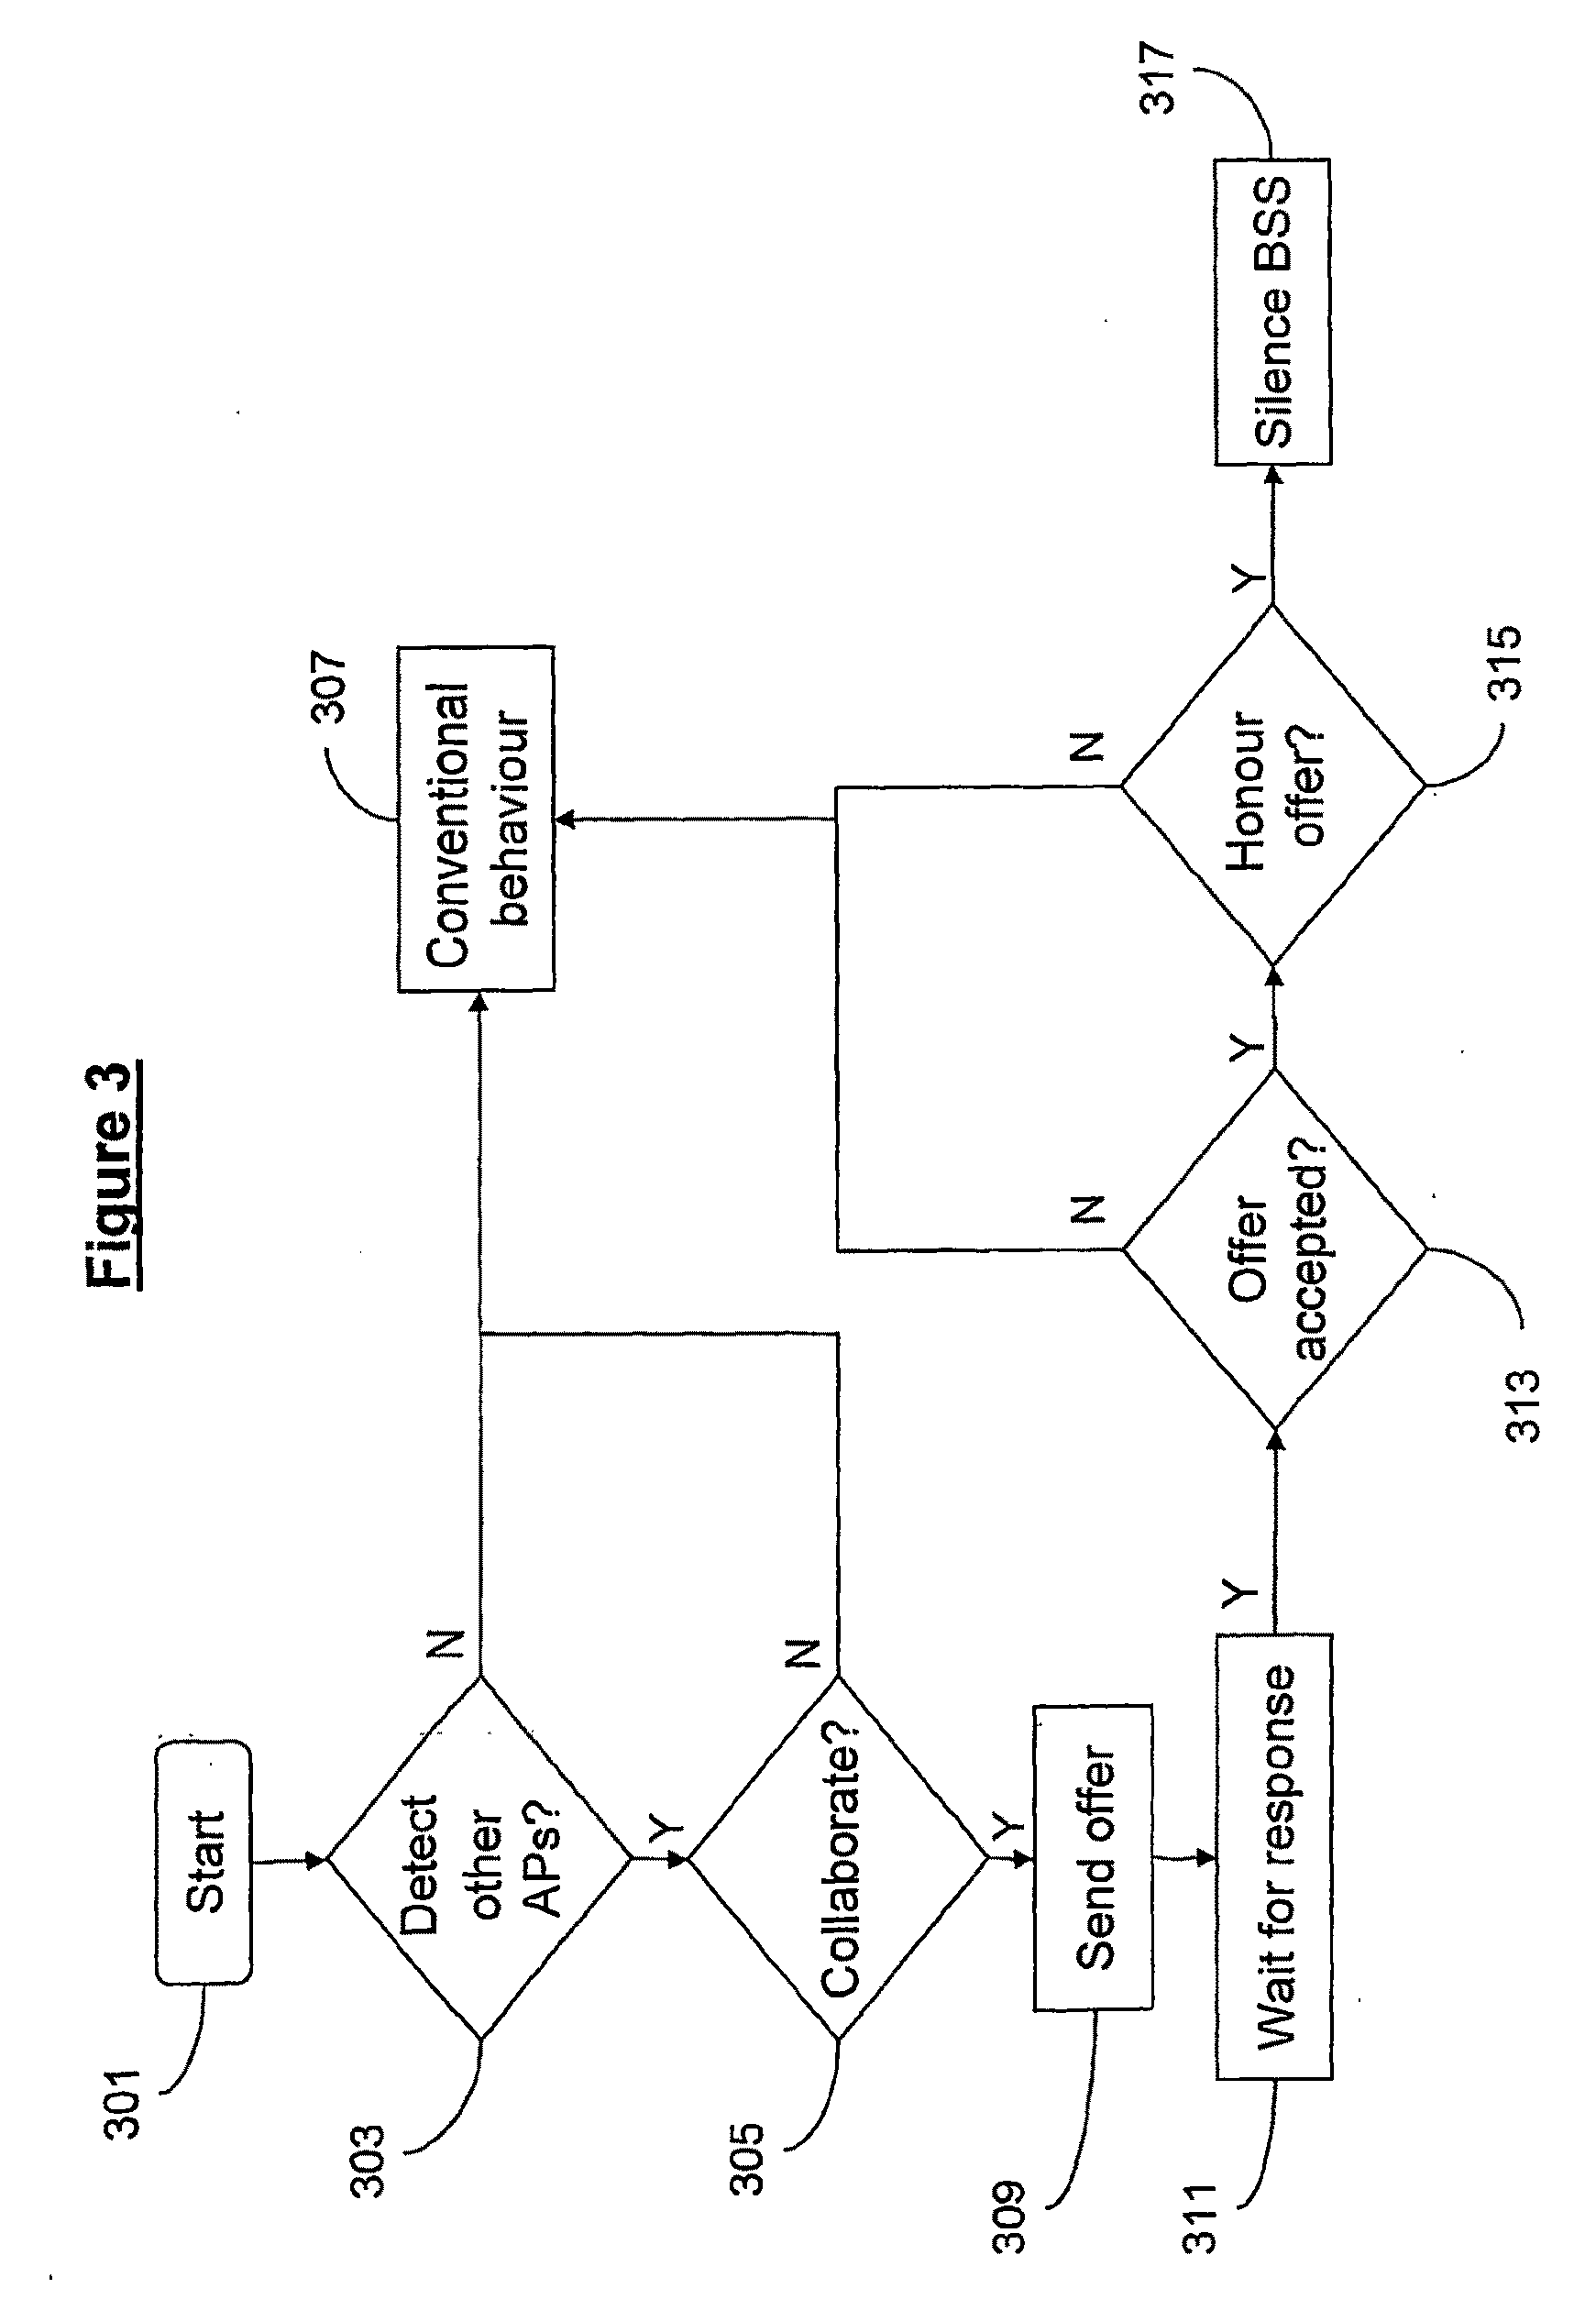 Wireless networking system and method